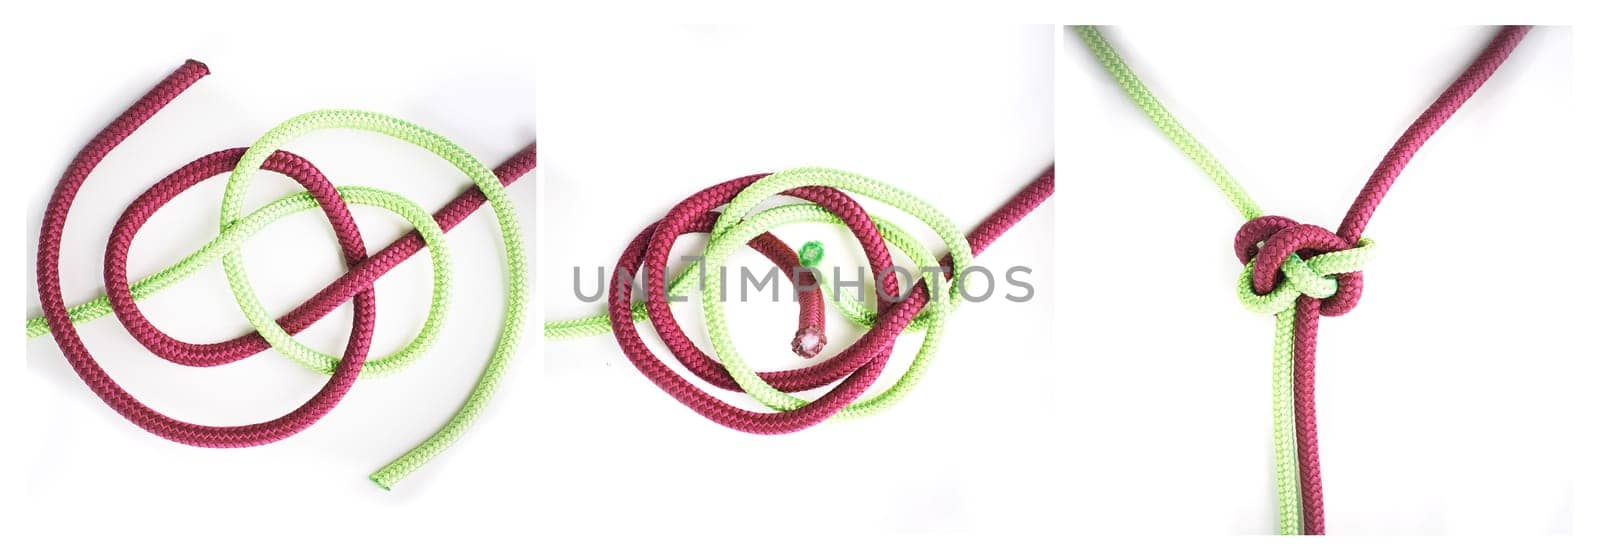 Knot, cords or how to tie ropes on white background in studio for security or instruction steps frame. Material, safety or color design for technique, gear tools or learning for survival guide lesson by YuriArcurs